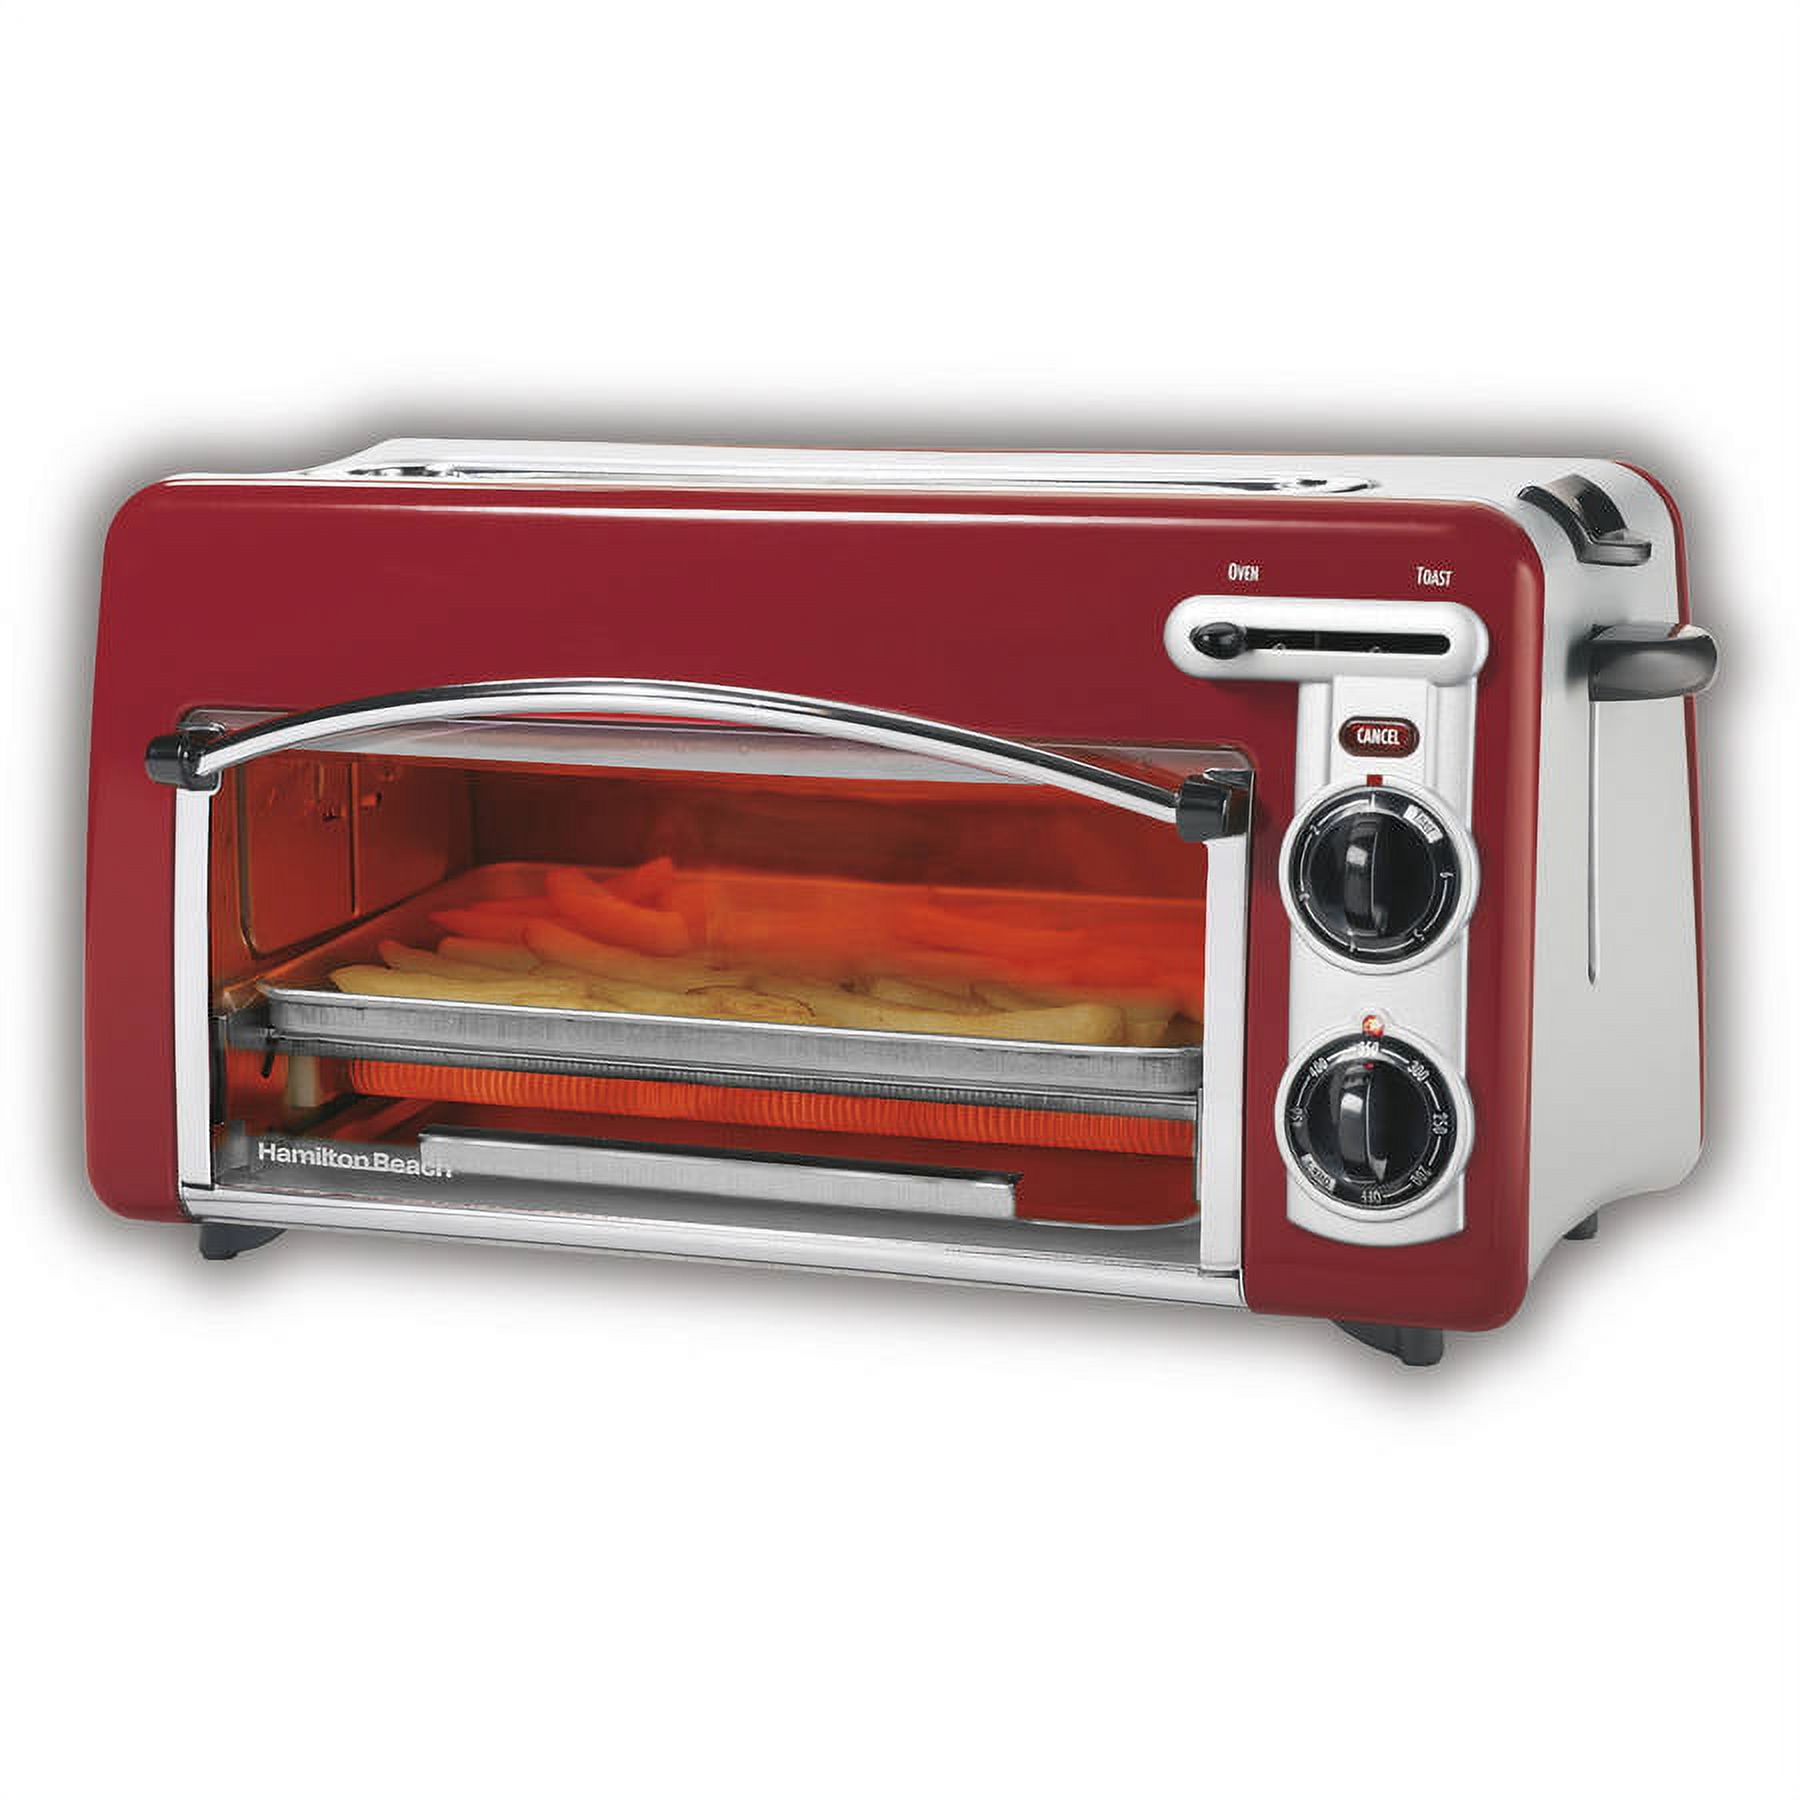 Hamilton Beach Toastation 2-in-1 2 Slice Toaster & Oven In Red | Model# 22703 - image 3 of 4